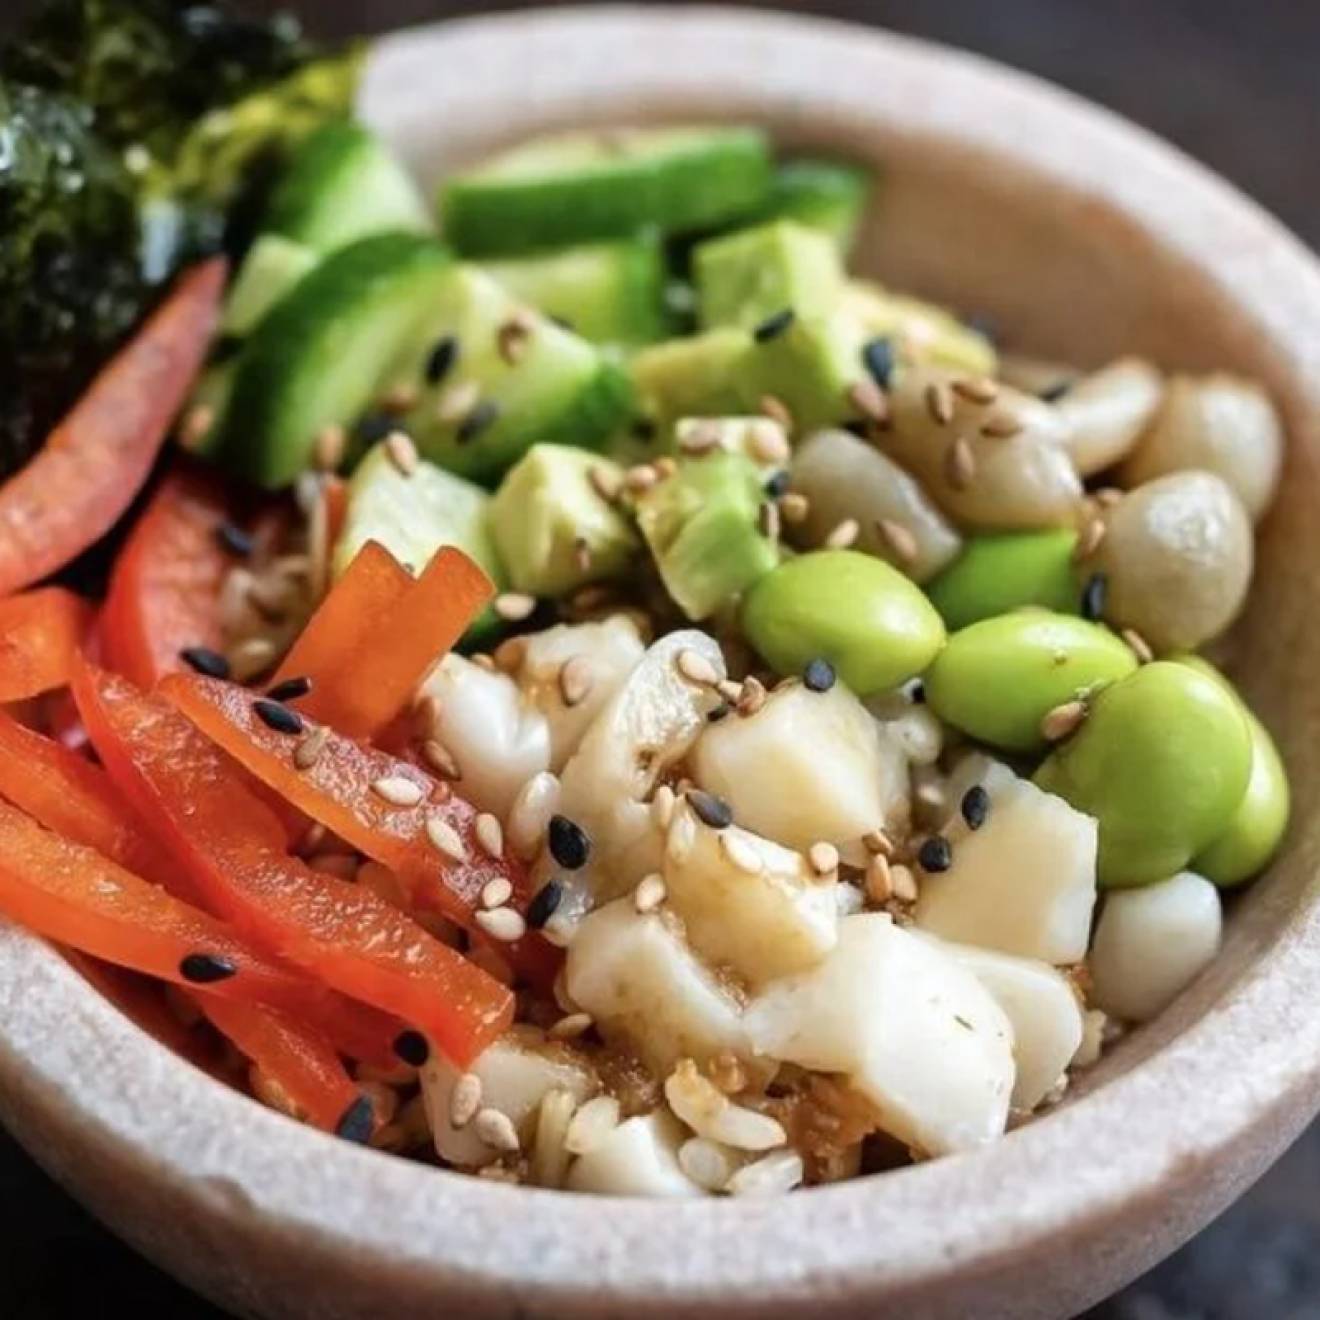 A poke bowl with vegetables, edamame, fish, sesame seeds and seaweed